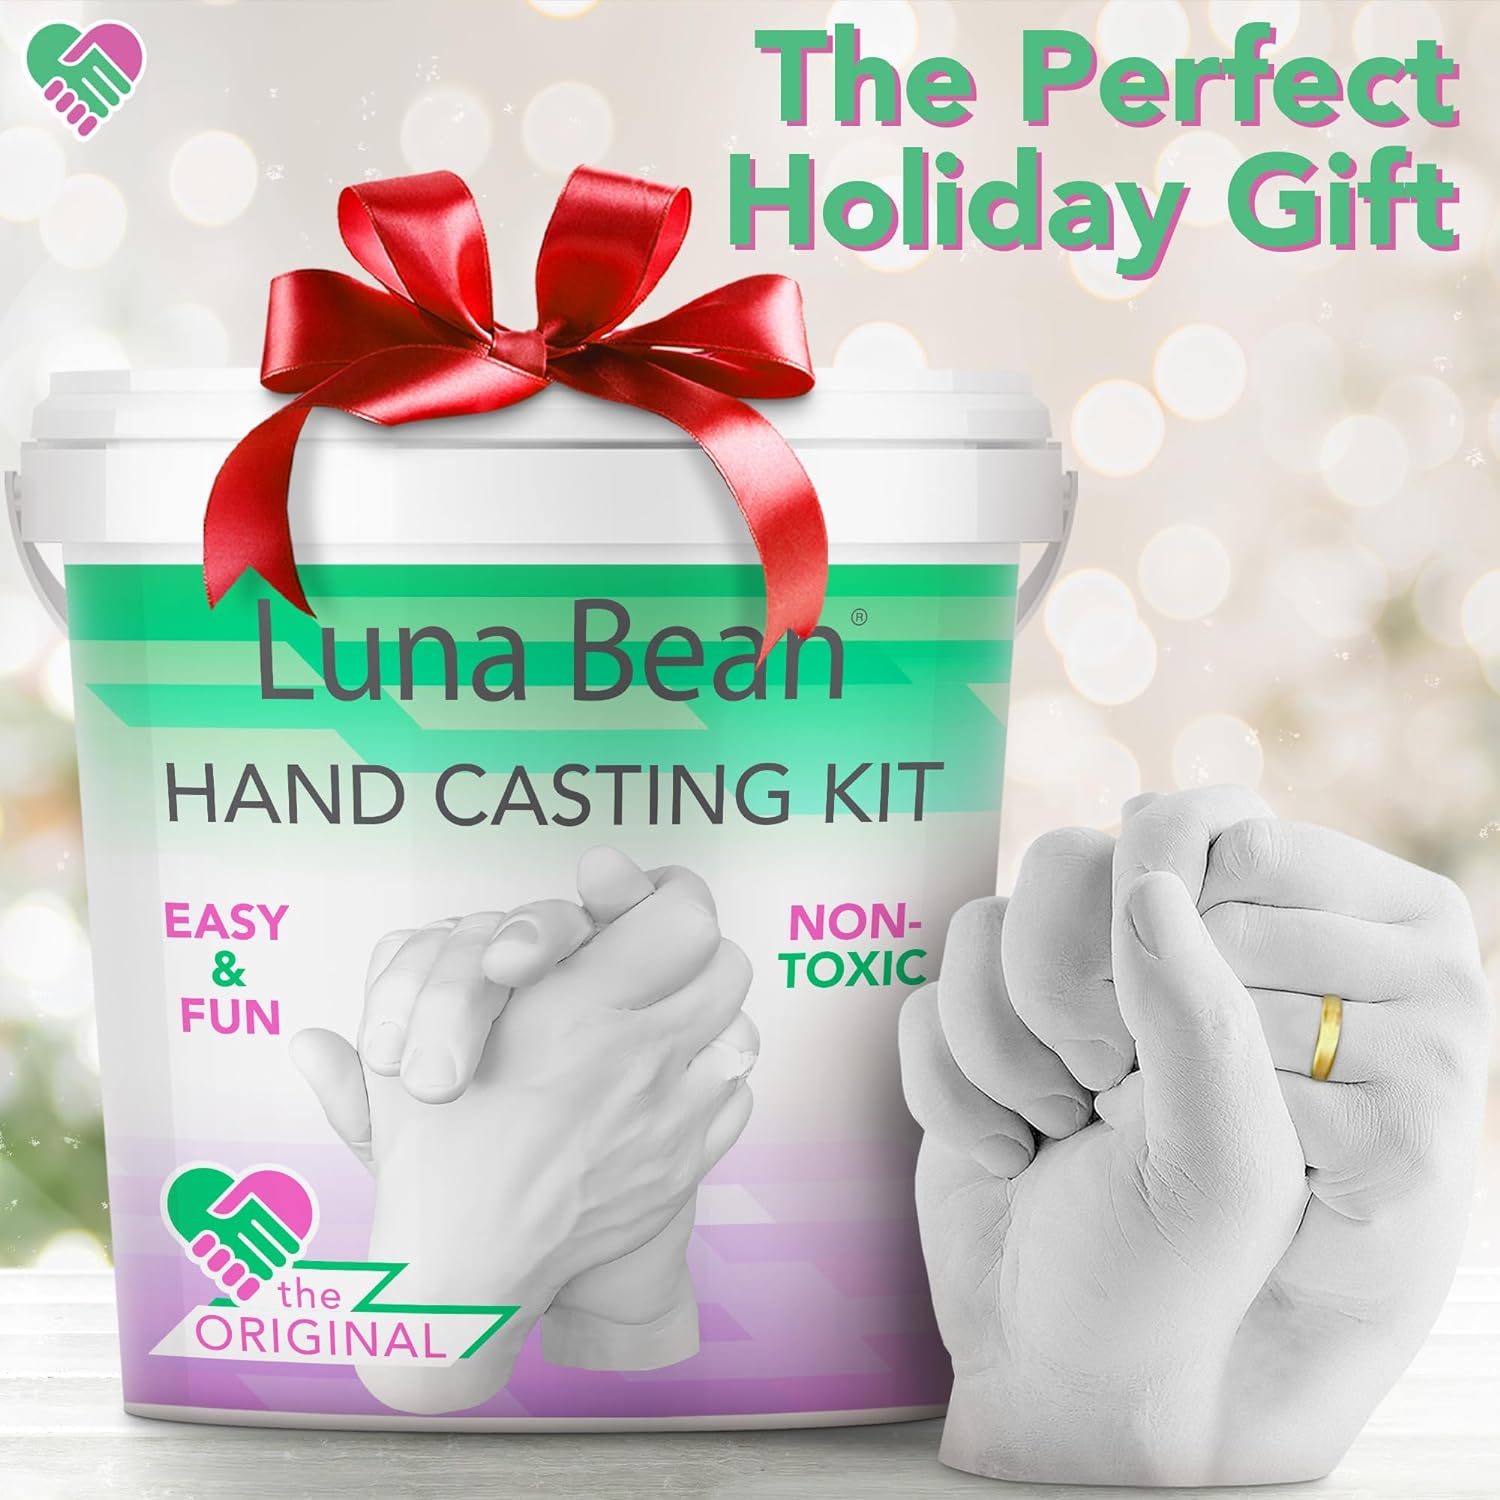 Luna Bean Hand Casting Kit - Hand Mold Kit Couples Gifts - Christmas Gifts for Women, Mom - Gifts for Her, Him - Unique Anniversary & Bridal Shower Gifts, Wedding, Engagement, Grandma Gifts